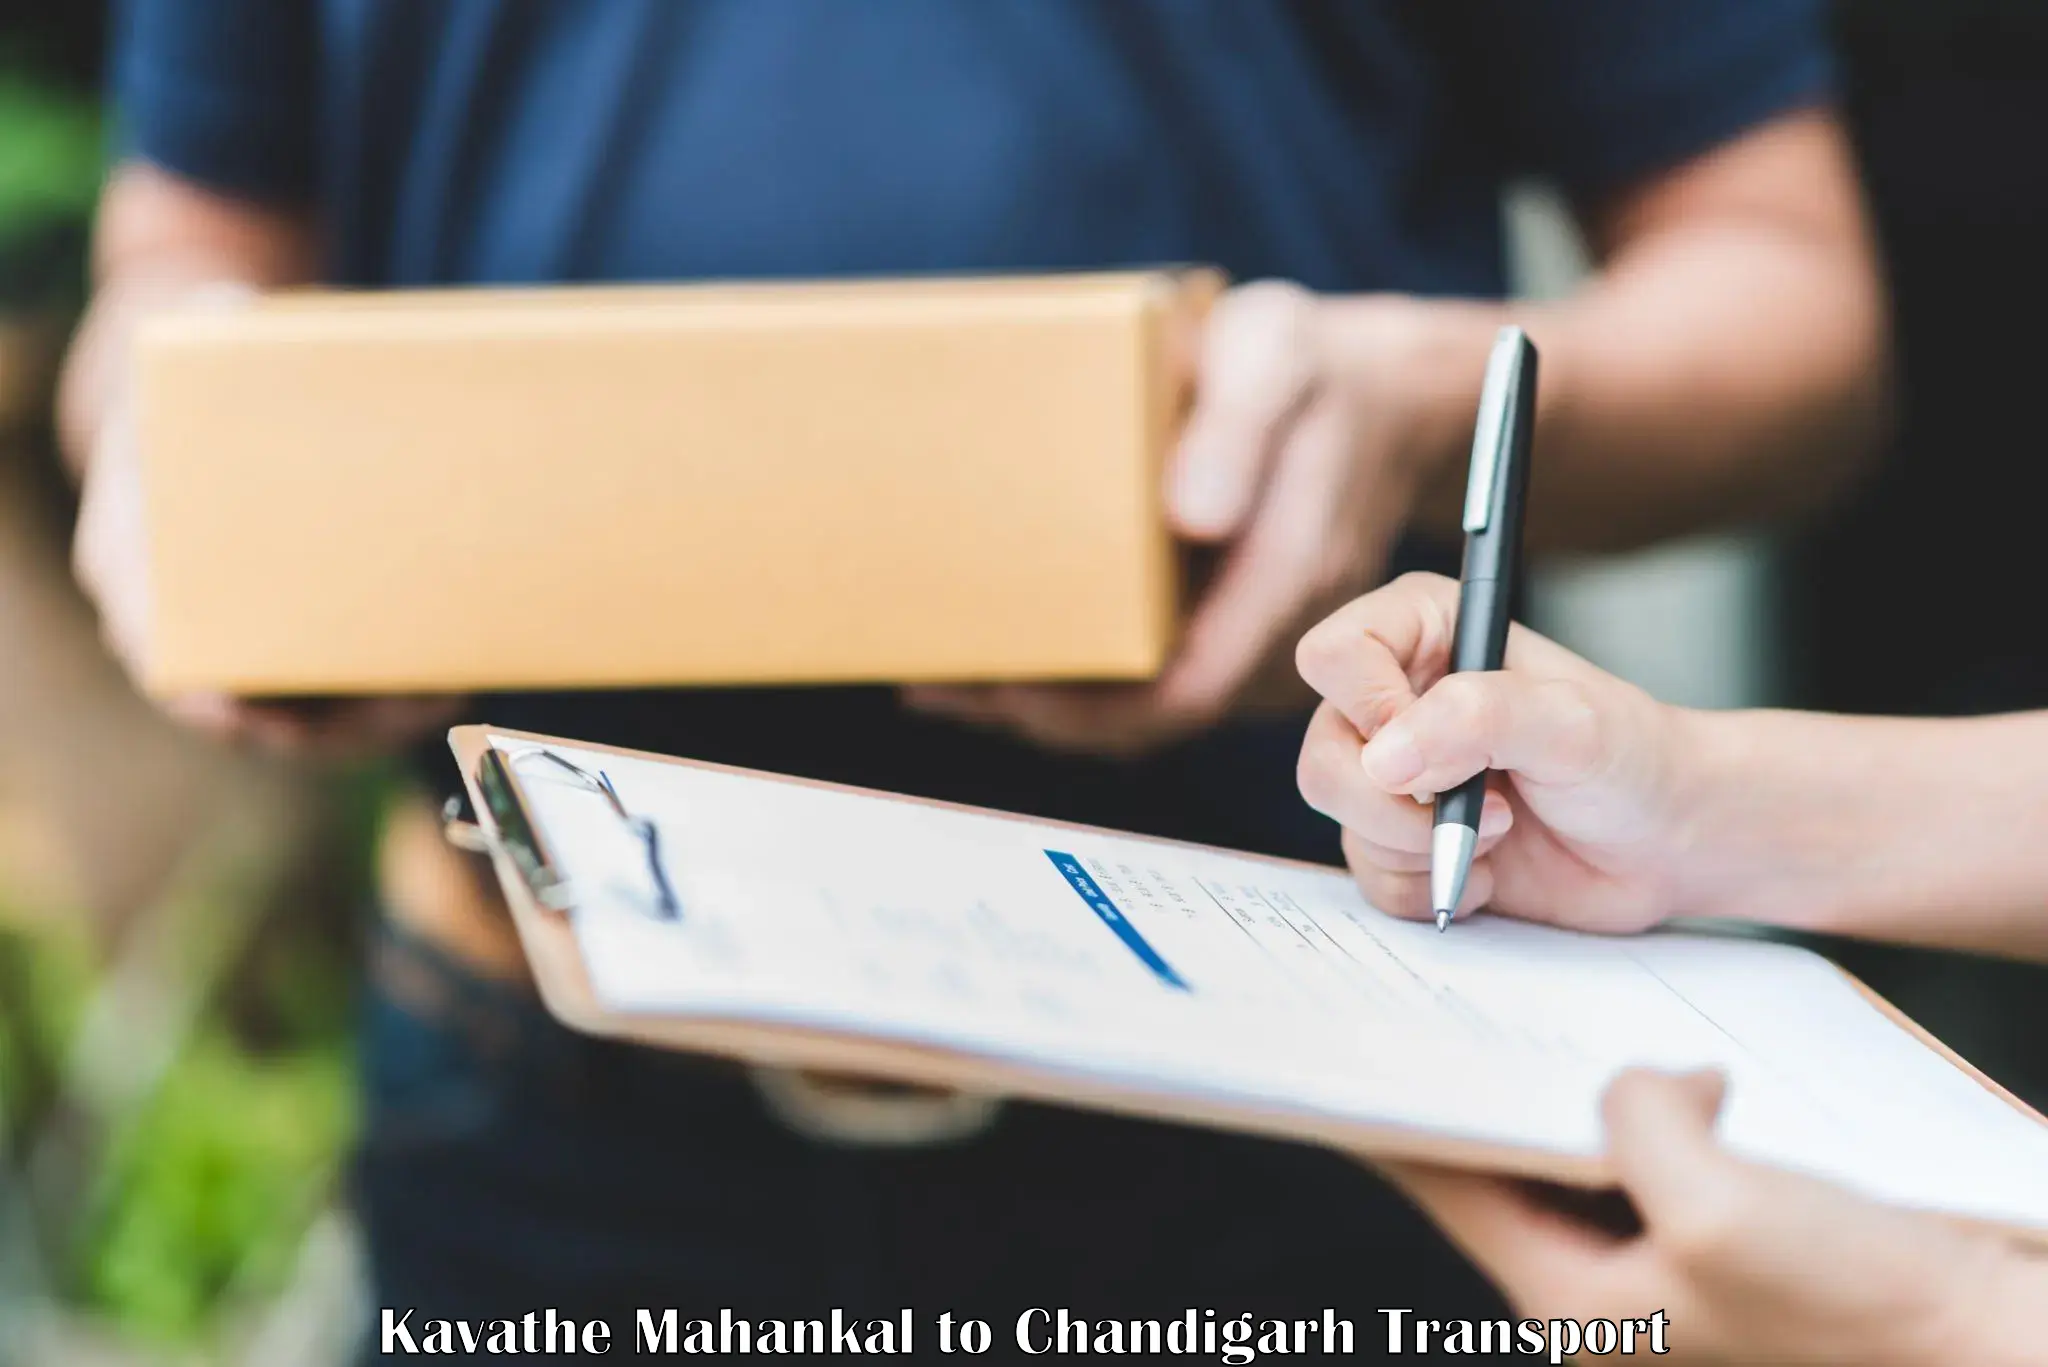 Commercial transport service Kavathe Mahankal to Chandigarh